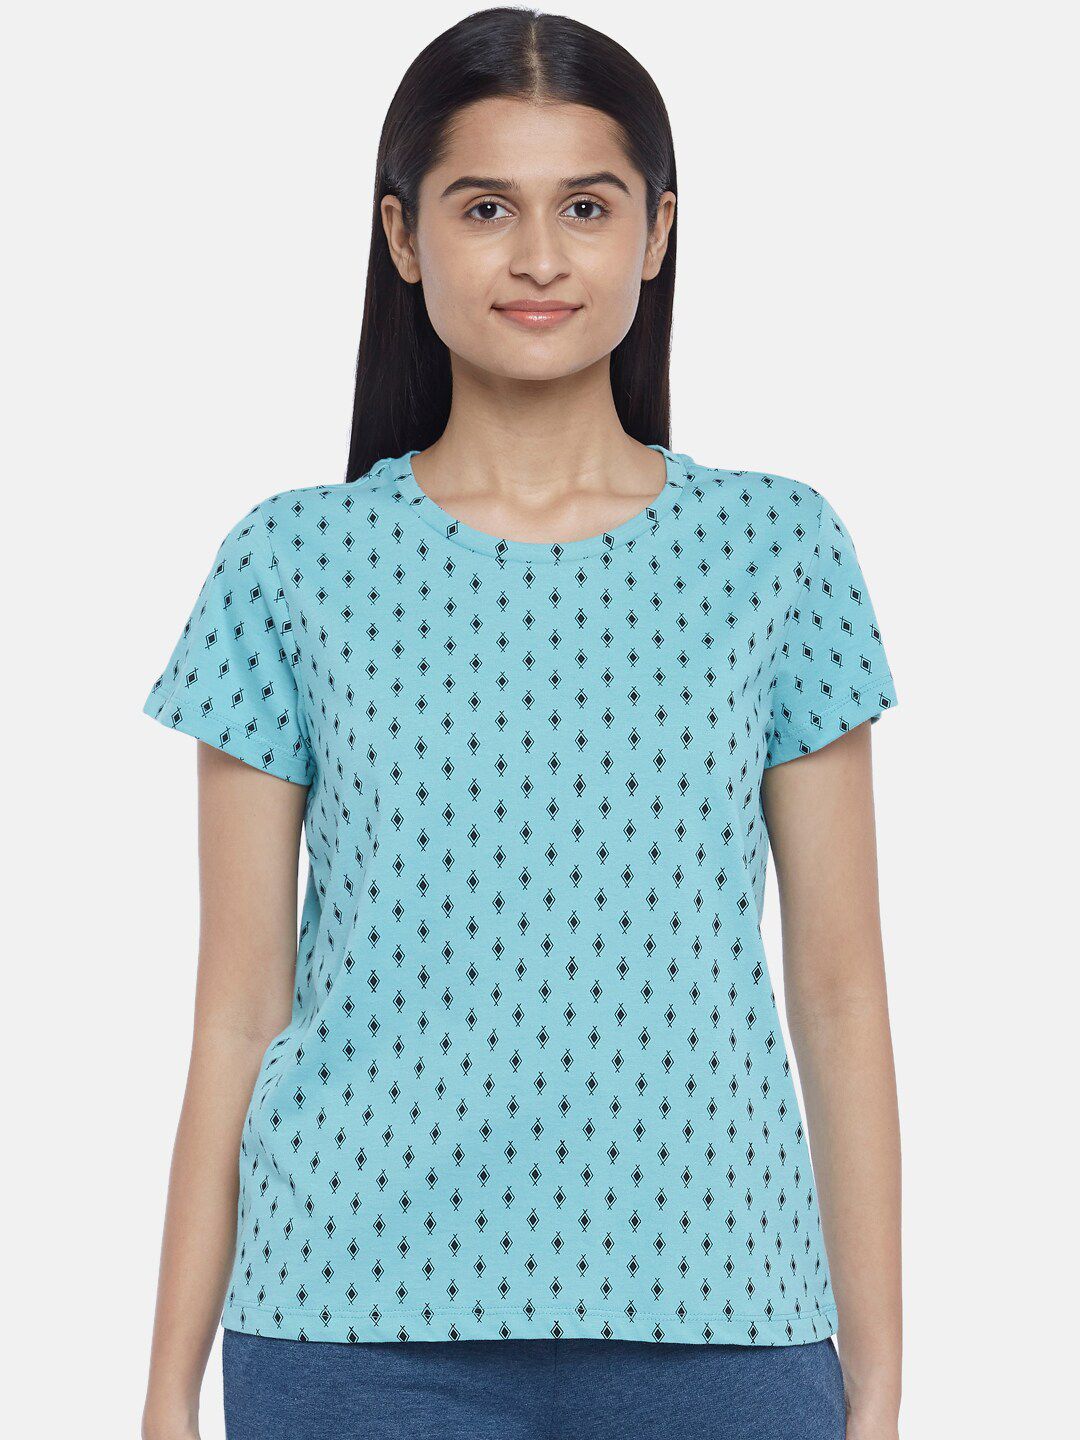 Dreamz by Pantaloons Turquoise Blue Geometric Print Lounge tshirt Price in India